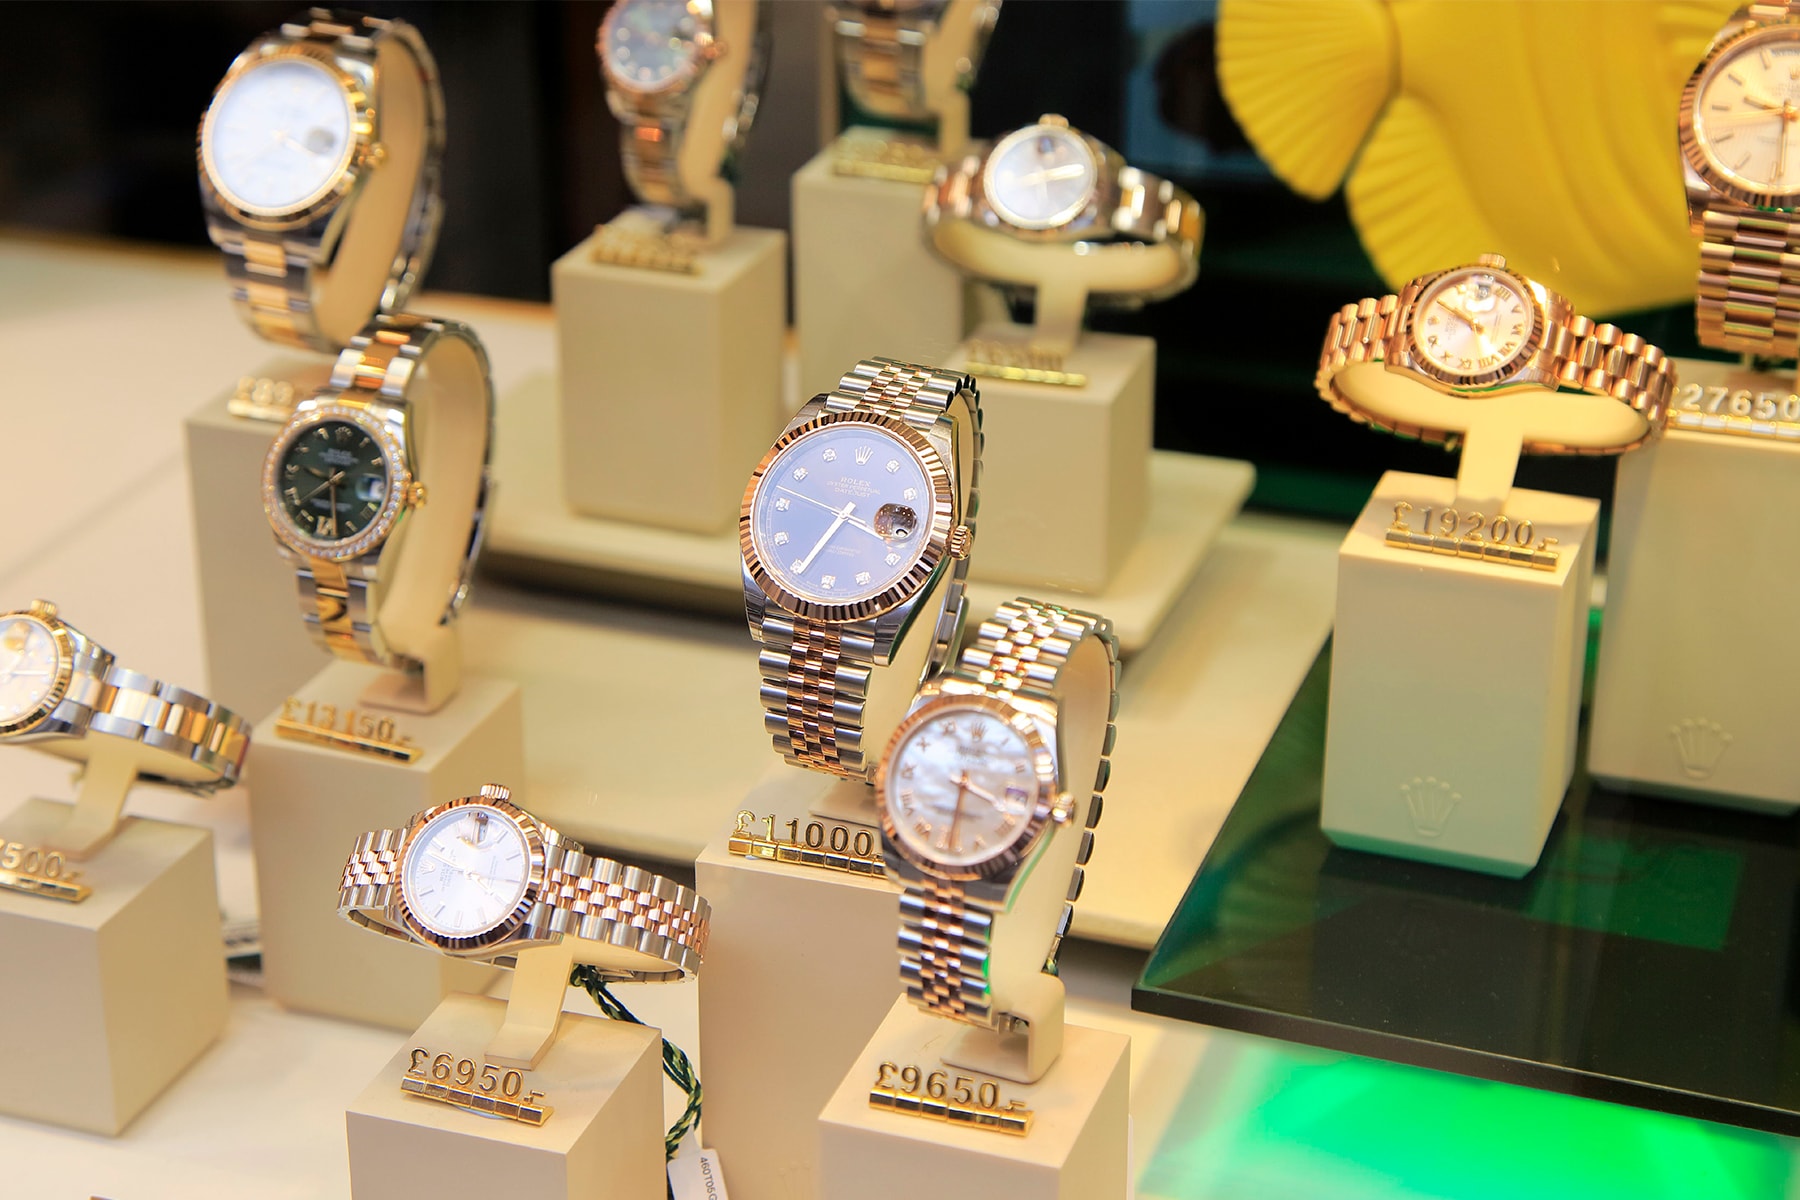 us customs and border protection $10.1 Million USD 460 Counterfeit Rolex Watches seized Hong Kong 